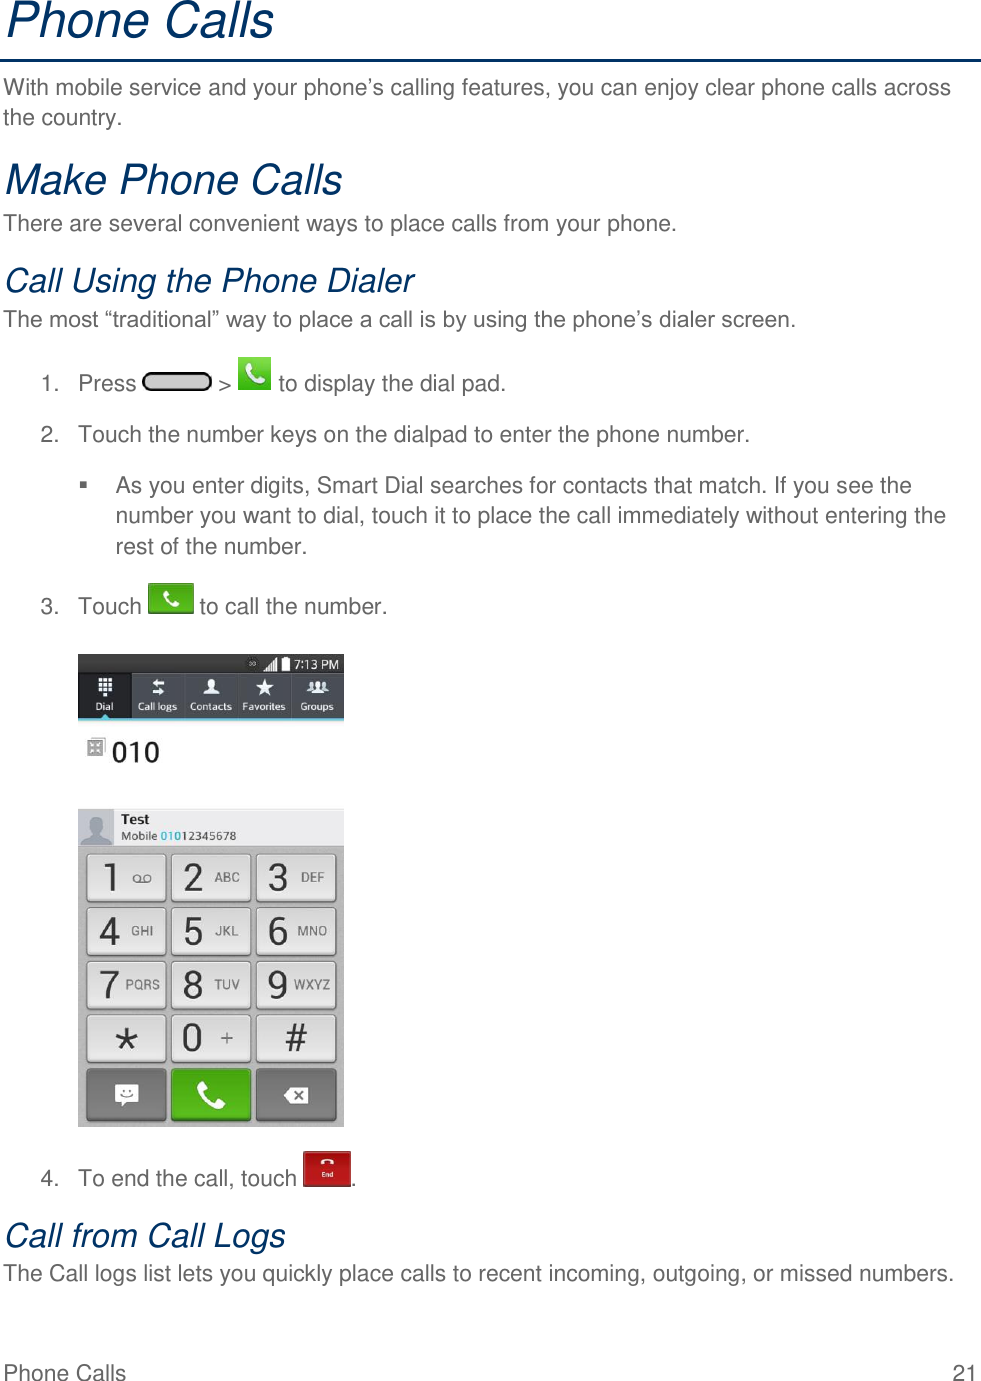 Phone Calls  21 Phone Calls With mobile service and your phone‘s calling features, you can enjoy clear phone calls across the country. Make Phone Calls There are several convenient ways to place calls from your phone. Call Using the Phone Dialer The most ―traditional‖ way to place a call is by using the phone‘s dialer screen.  1.  Press   &gt;   to display the dial pad. 2.  Touch the number keys on the dialpad to enter the phone number.   As you enter digits, Smart Dial searches for contacts that match. If you see the number you want to dial, touch it to place the call immediately without entering the rest of the number. 3.  Touch   to call the number.   4.  To end the call, touch  . Call from Call Logs The Call logs list lets you quickly place calls to recent incoming, outgoing, or missed numbers. 